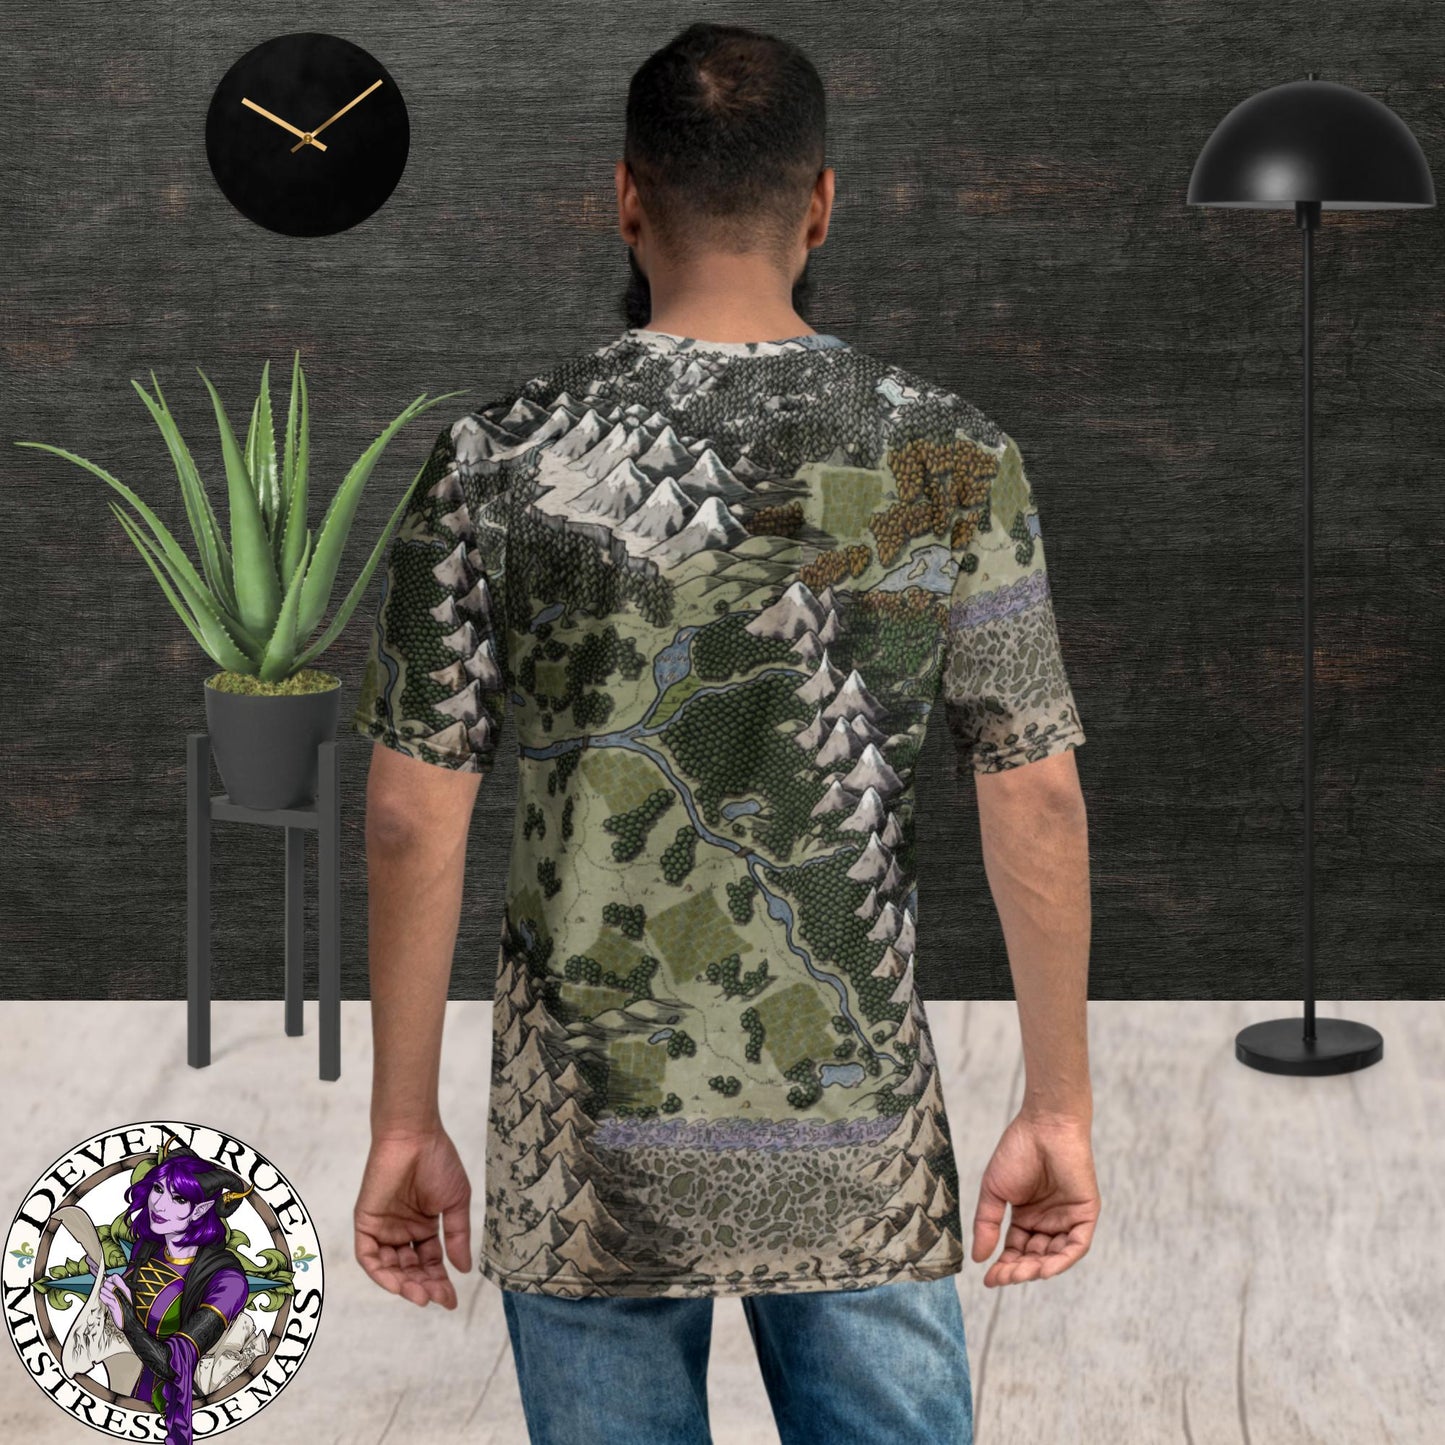 Back view: A model wears a crew neck tee shirt with the Vendras map by Deven Rue printed on it.